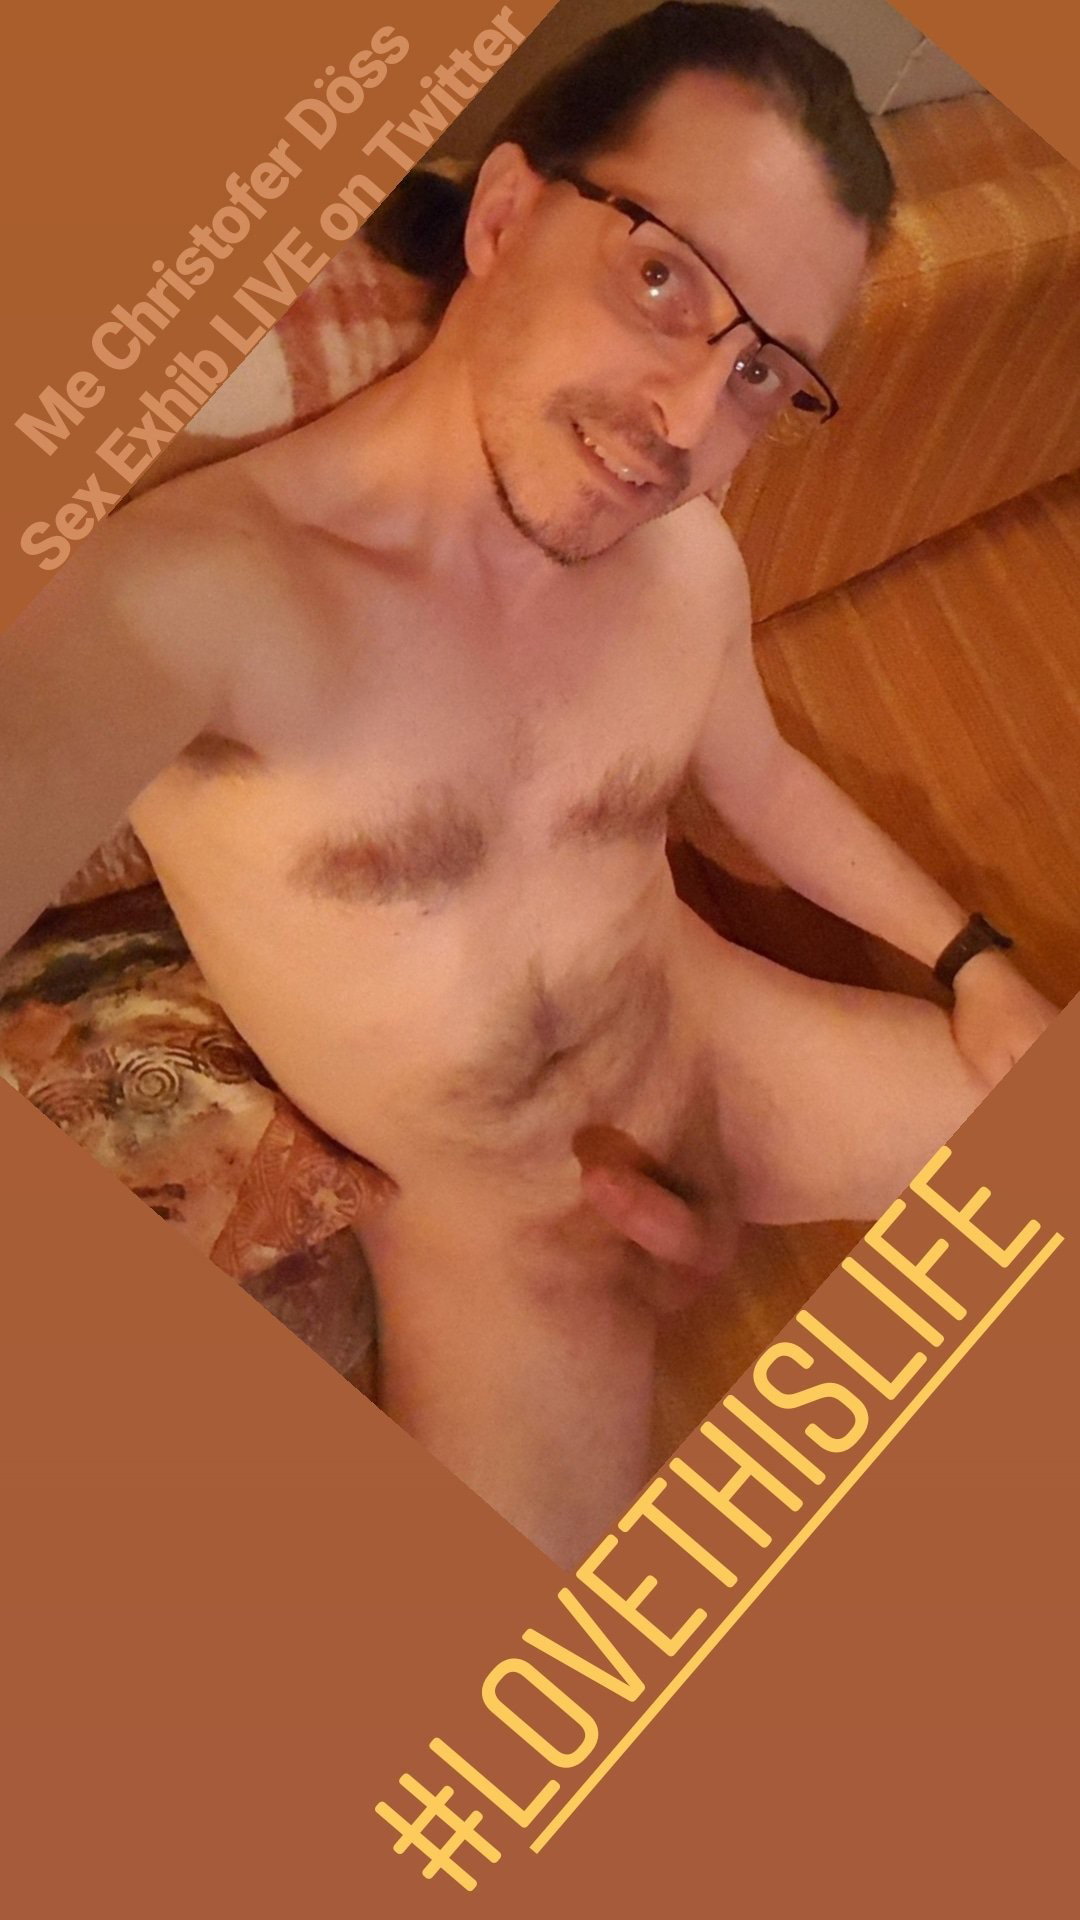 Photo by Christofer Döss with the username @ChristoferDoss, who is a verified user,  April 14, 2019 at 10:55 PM. The post is about the topic Gay and the text says 'I am Christofer Döss Sex Exhib aka the bisexual life enjoying nude model nakencrille and I sooo looove being sexually exposed publicly online. ❤❤❤'